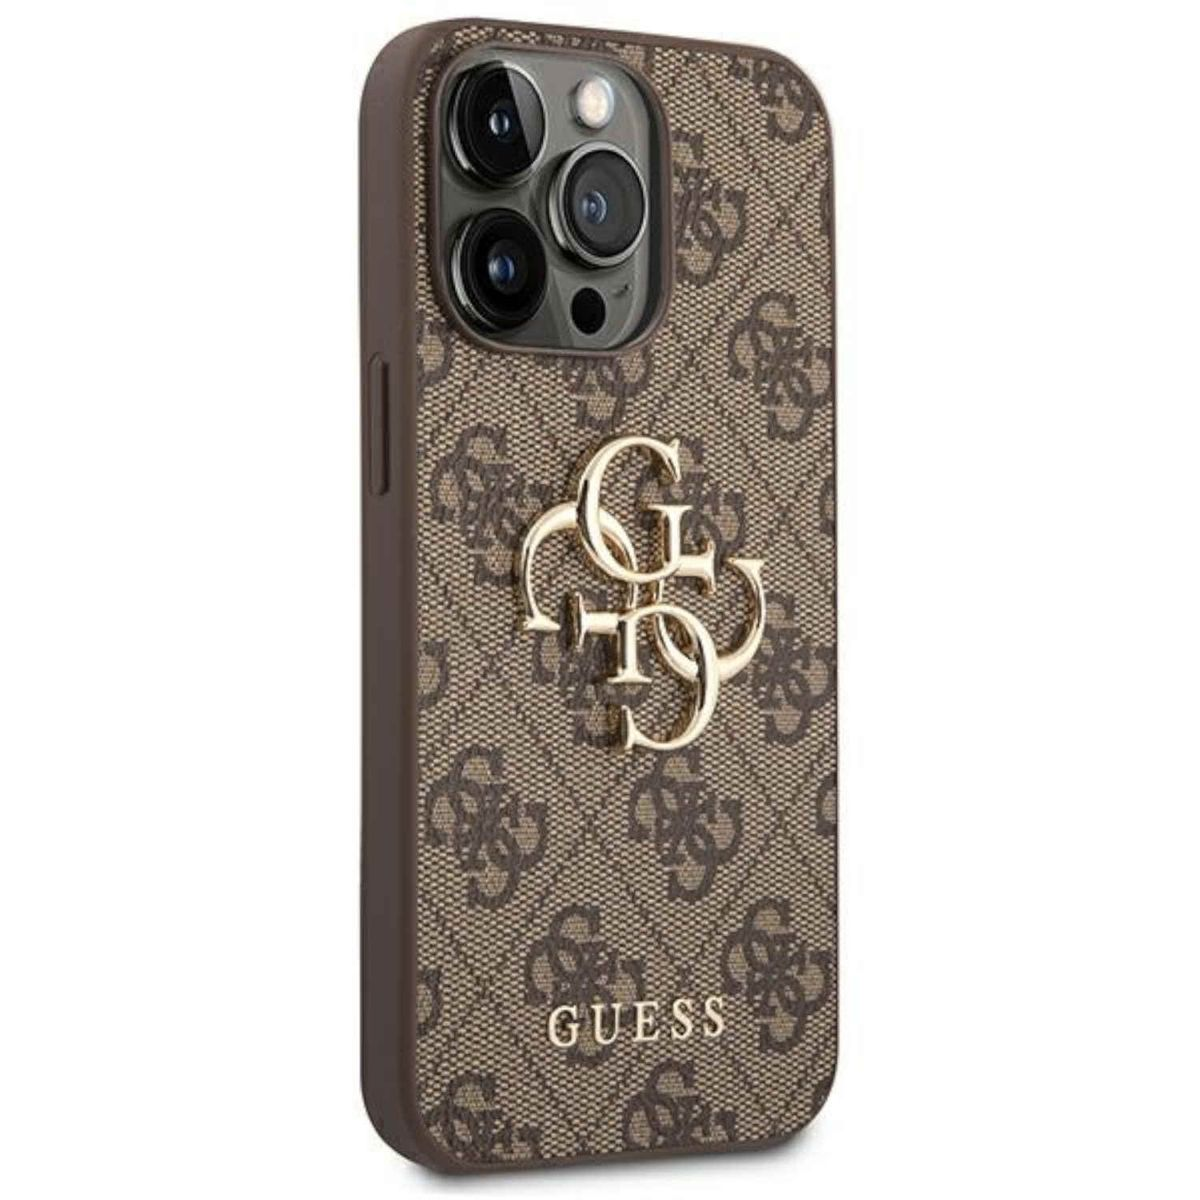 GUESS Max Keine Apple, Pro 4G iPhone Big (Brown), iPhone Pro Backcover, Angabe Metal Case Logo 14 14 Max,